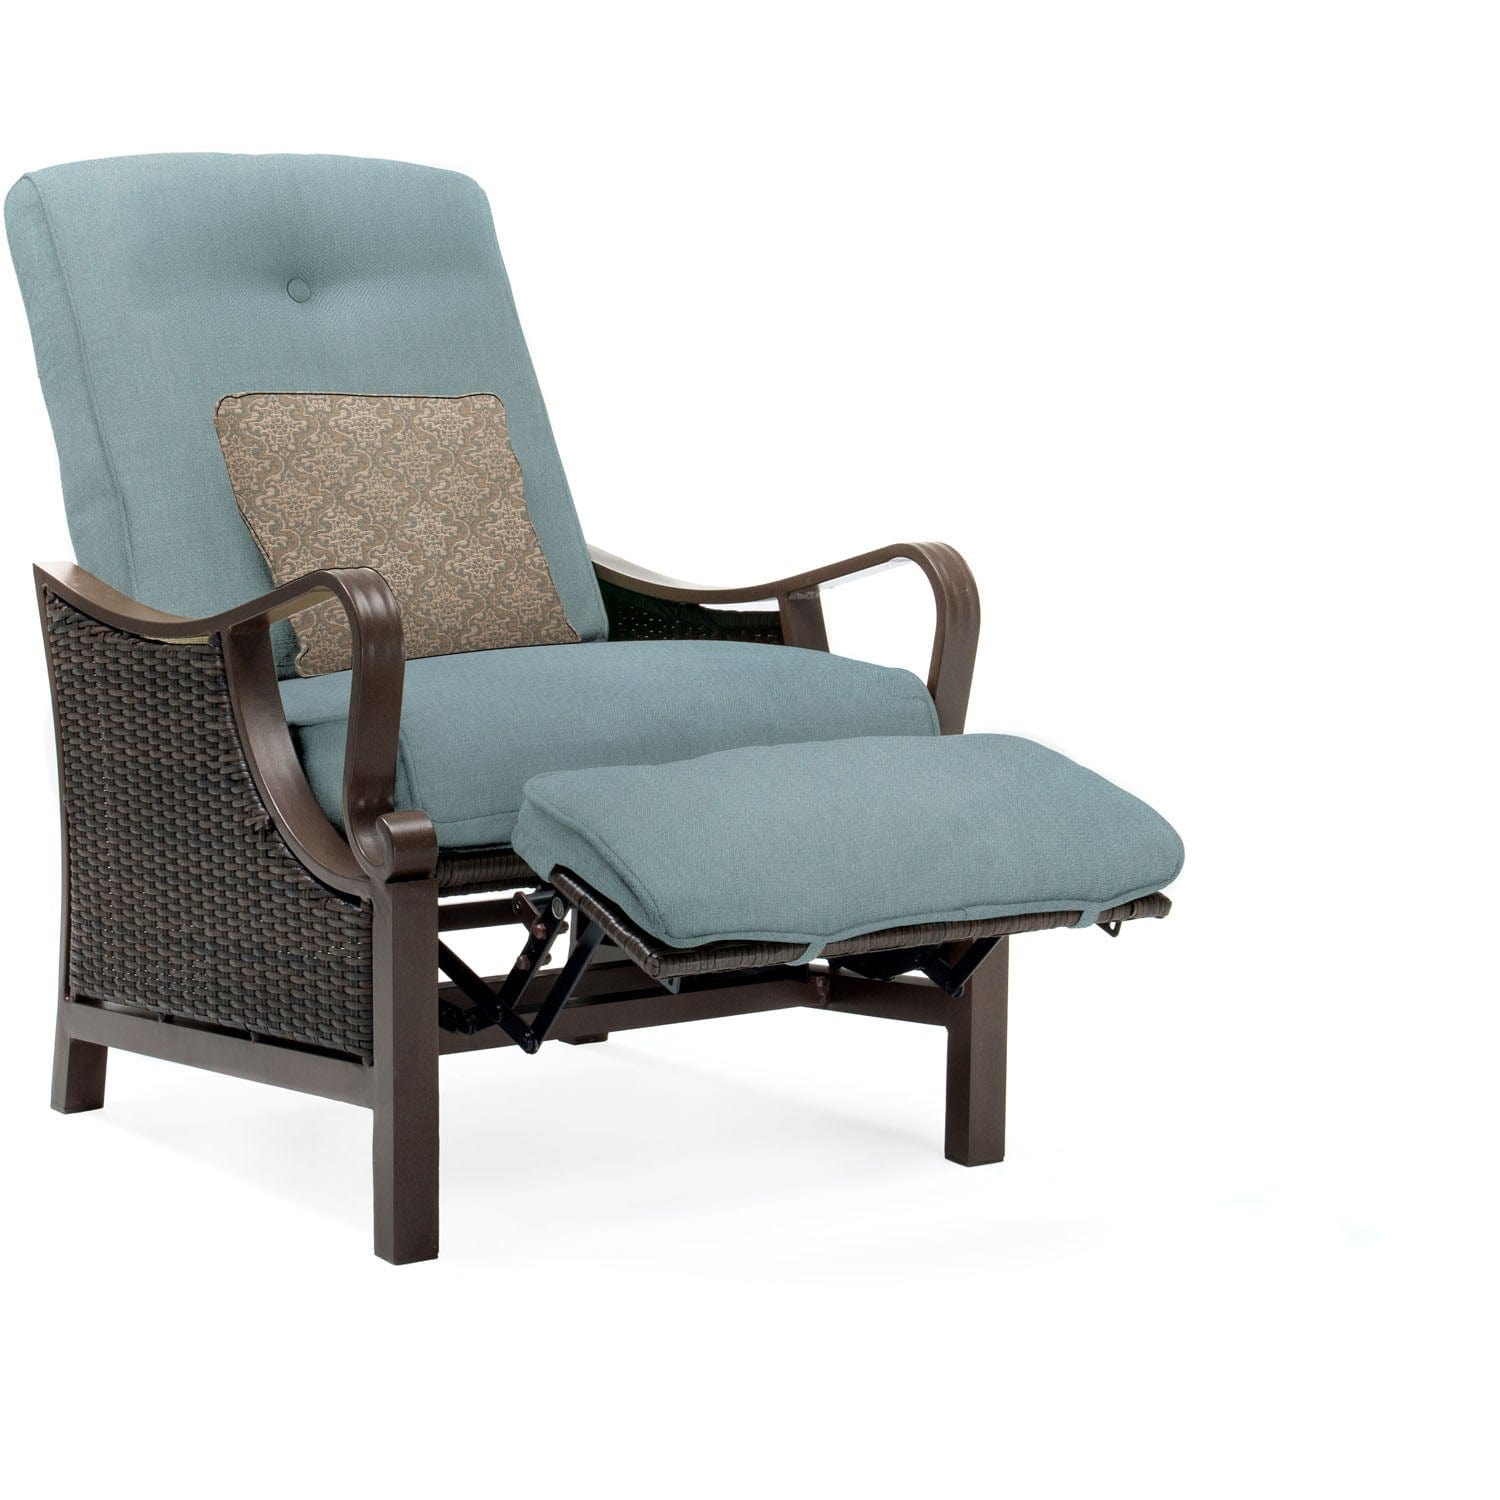 Hanover Lounge Chairs Hanover -Ventura Outdoor Luxury Recliner | with Pillow Accessory, All-weather, Resin Weave |  Brown/Ocean Blue |  VENTURAREC-BLU